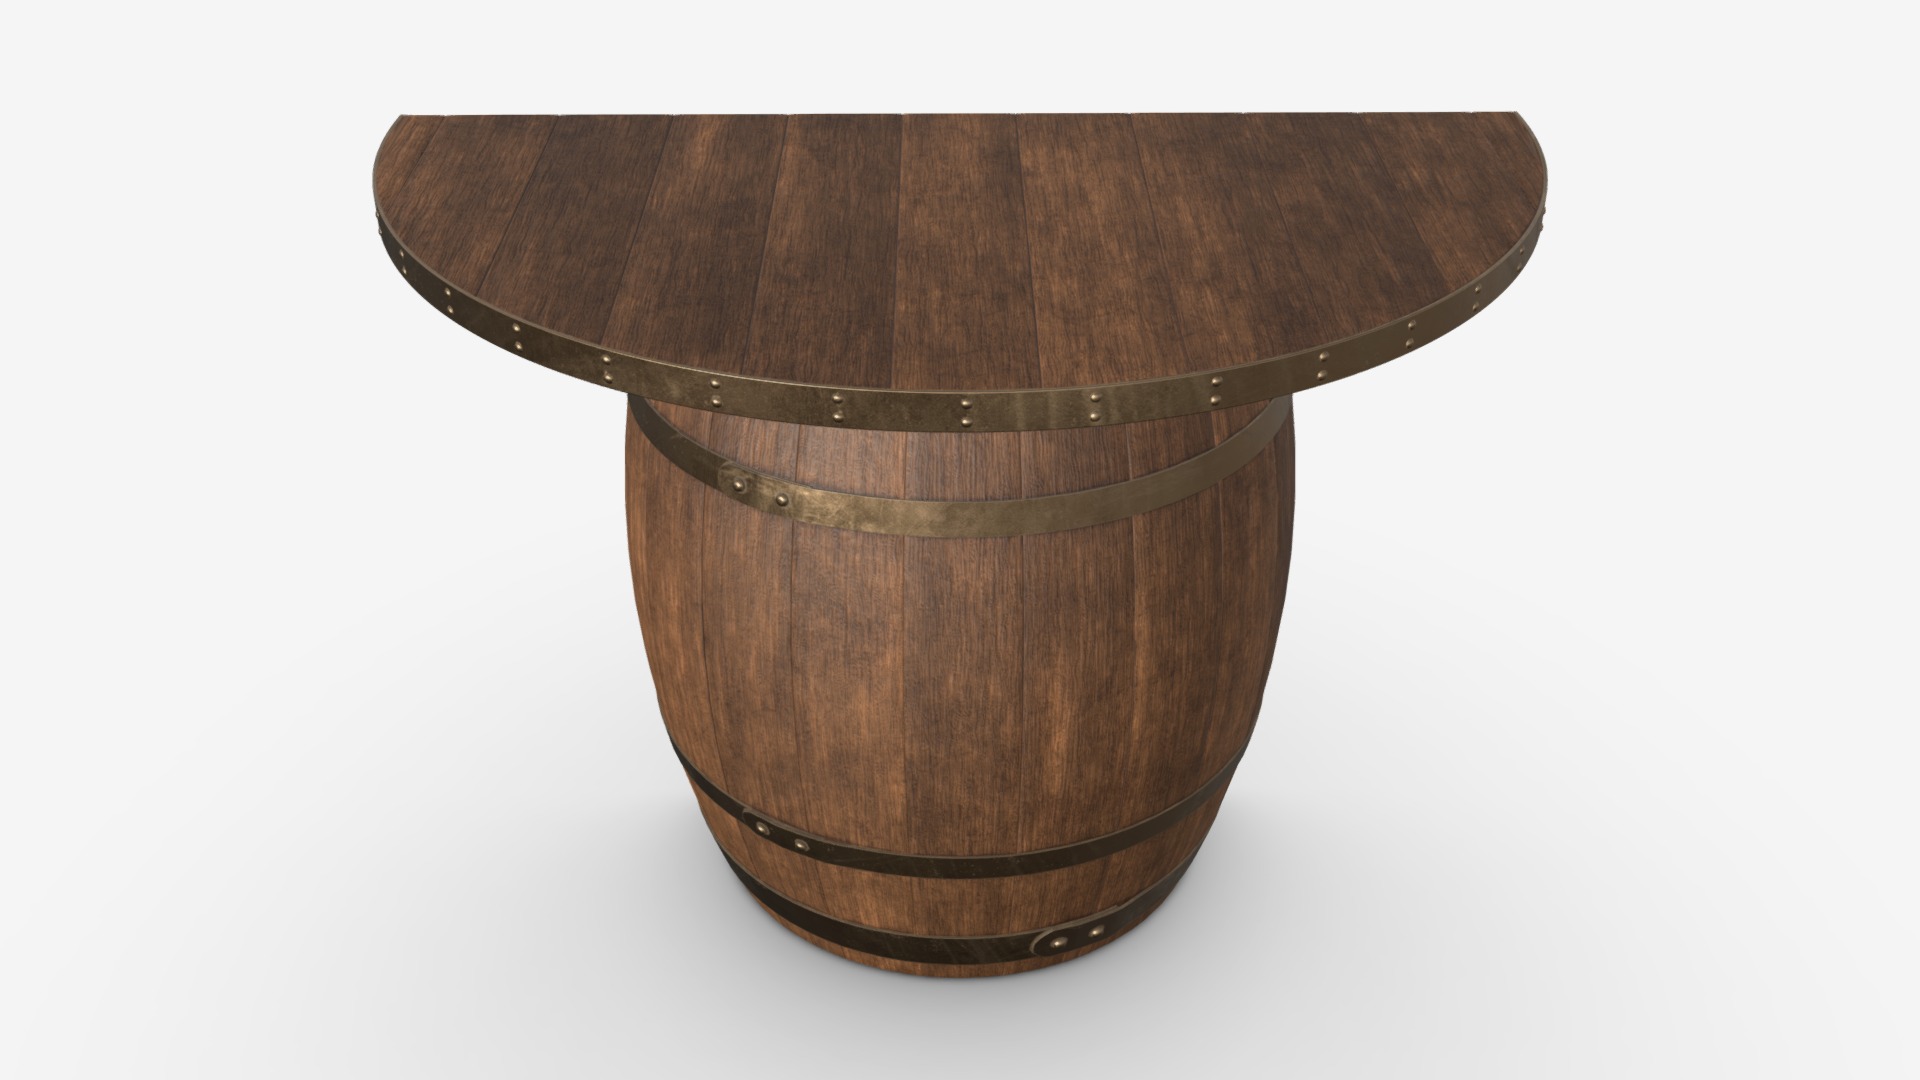 3D model Wooden barrel console table - This is a 3D model of the Wooden barrel console table. The 3D model is about a wooden barrel with a wooden base.